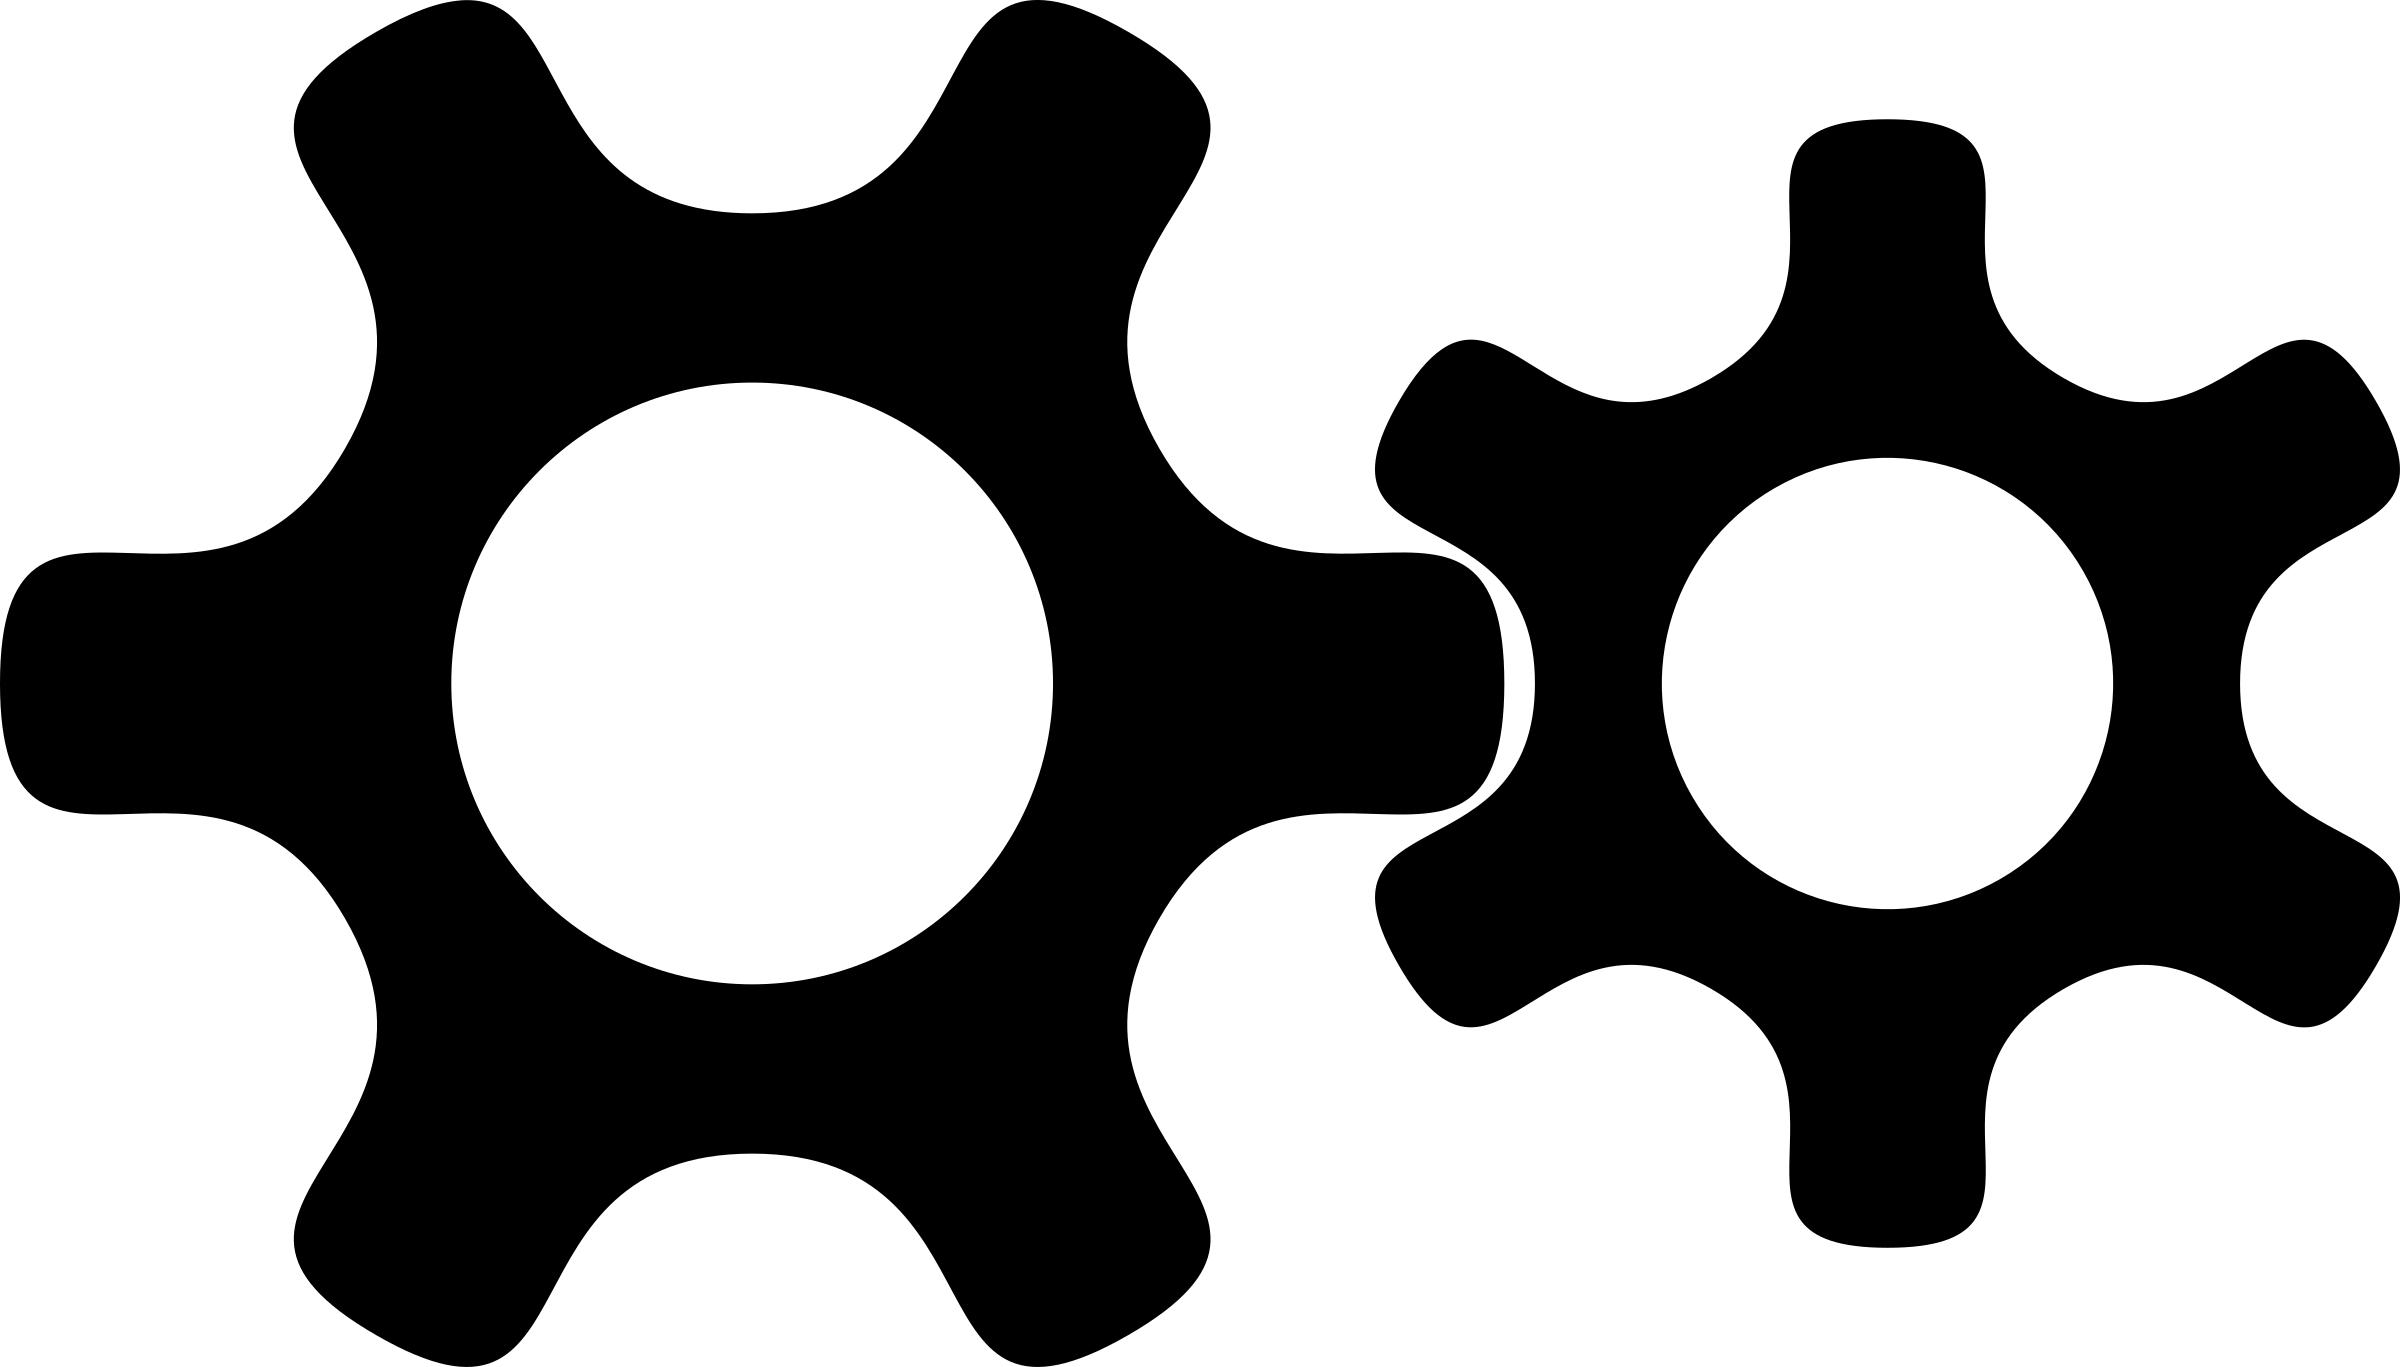 Meshed Gears png